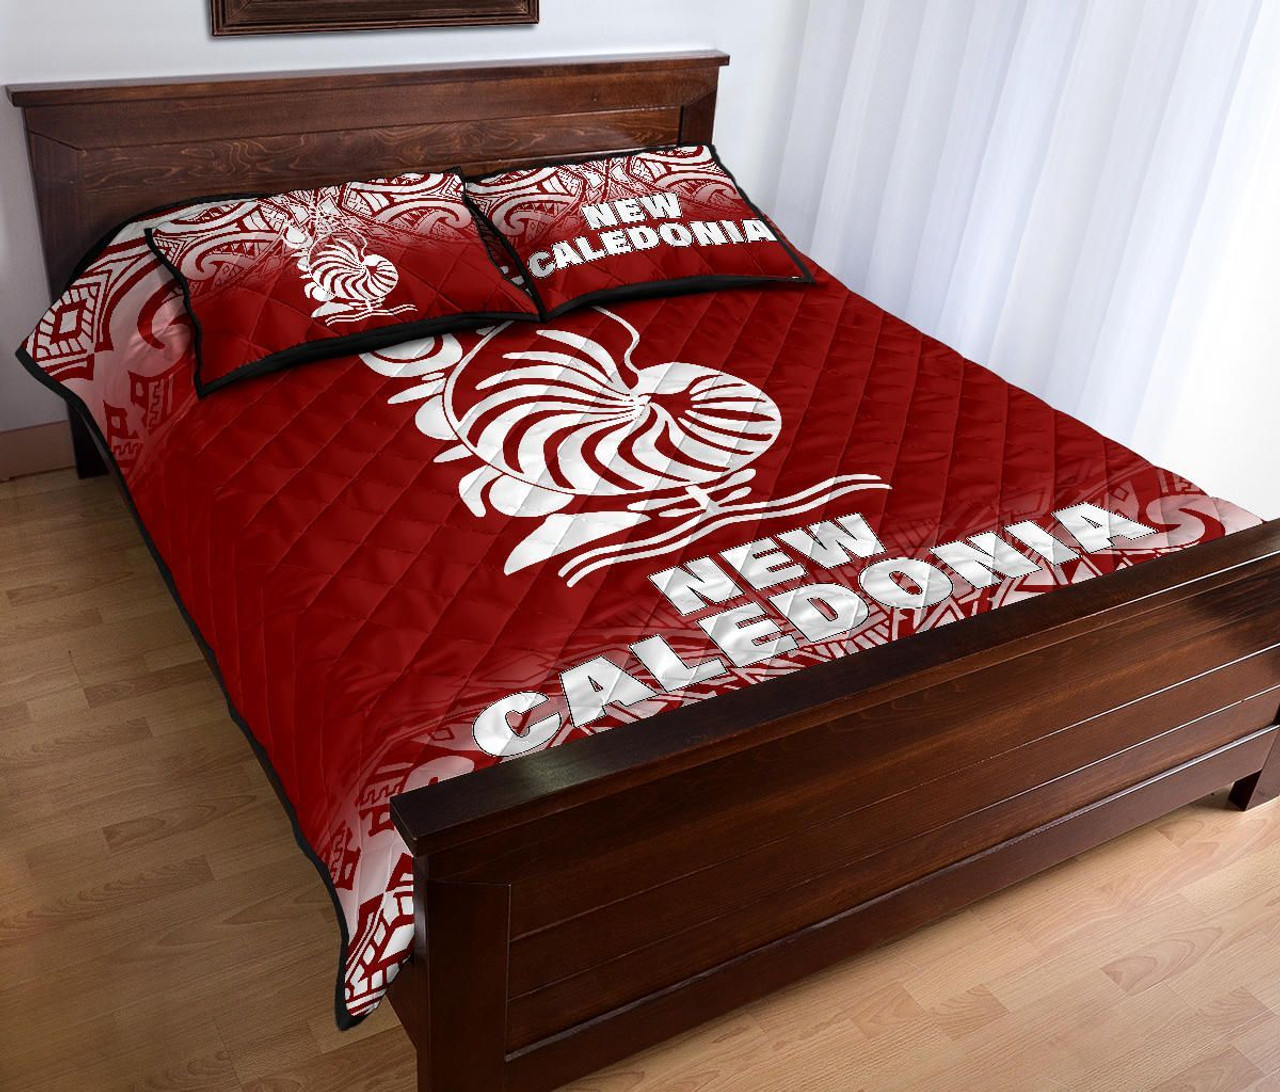 New Caledonia Quilt Bed Set - New Caledonia Coat Of Arms Polynesian Tattoo Red Fog Style 4